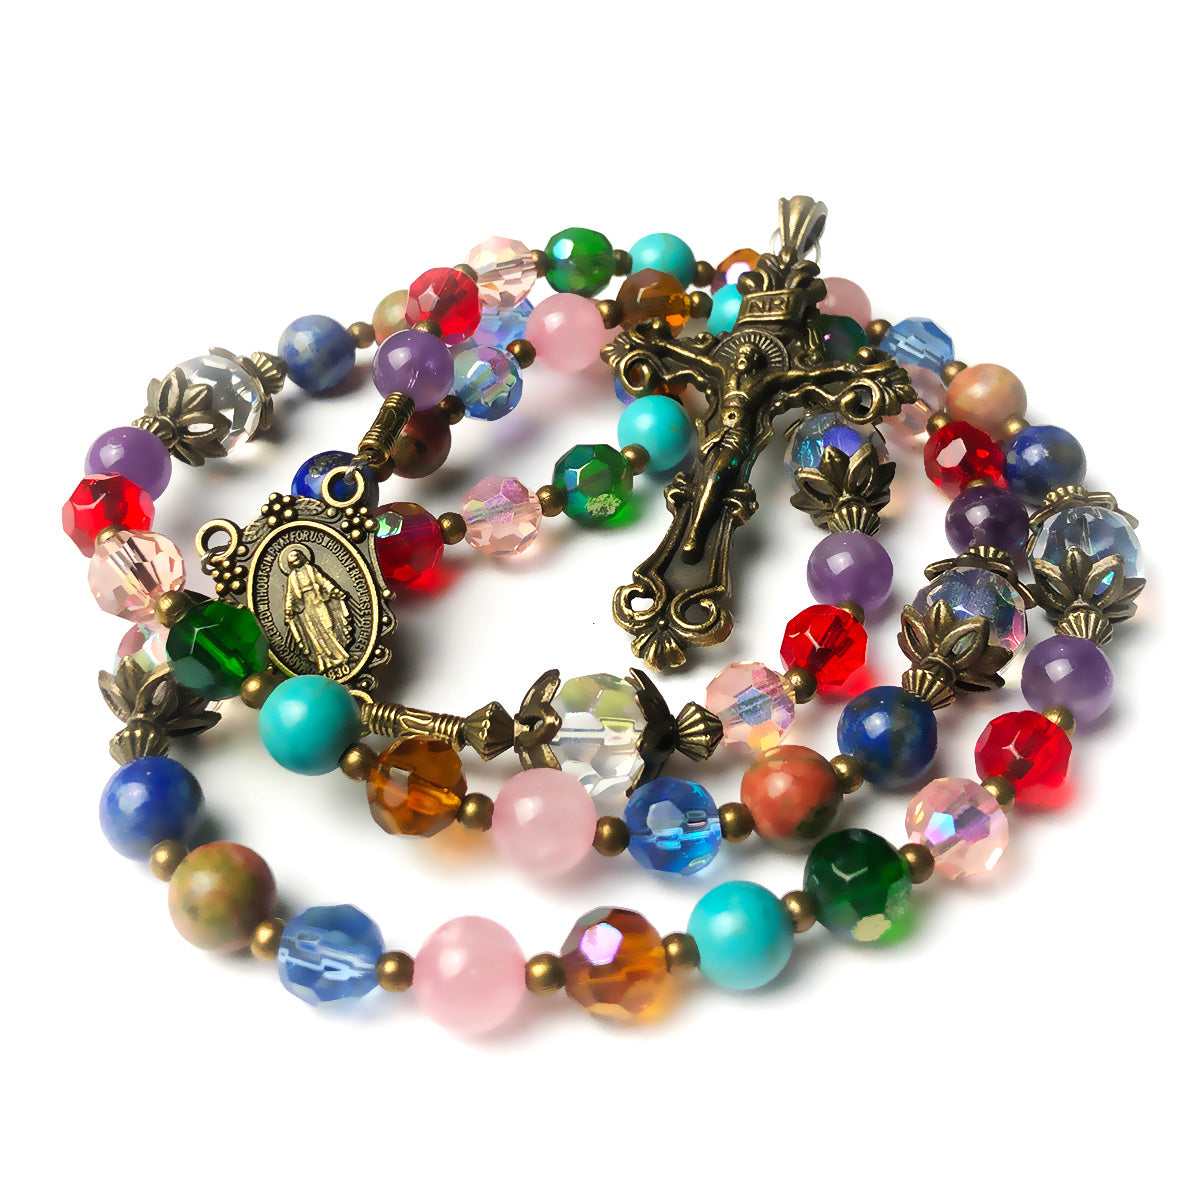 Basilica Window Crystal and Stone Rosary With Miraculous Medal by Catholic Heirlooms - Confirmation - Holy Communion Gift - Rosary Necklace